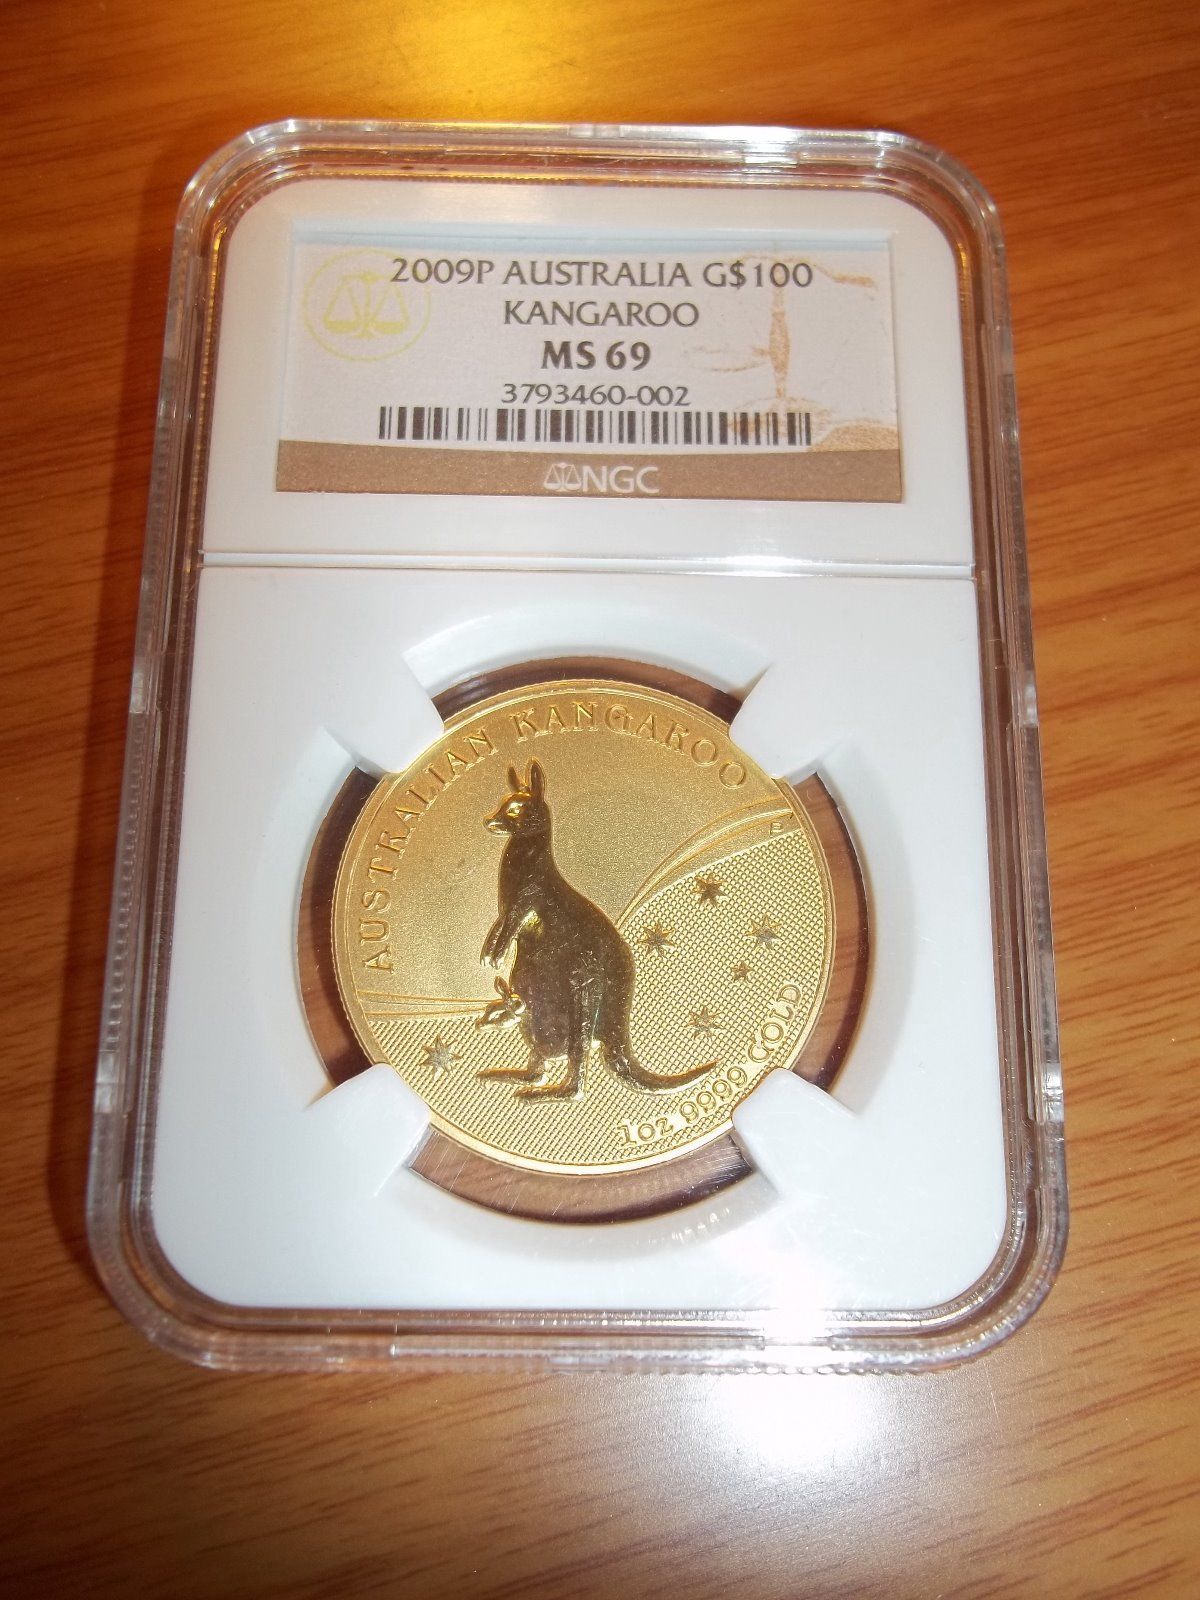 Solved: ALL FAKE 2009P Gold Coins yes or no ? - The eBay